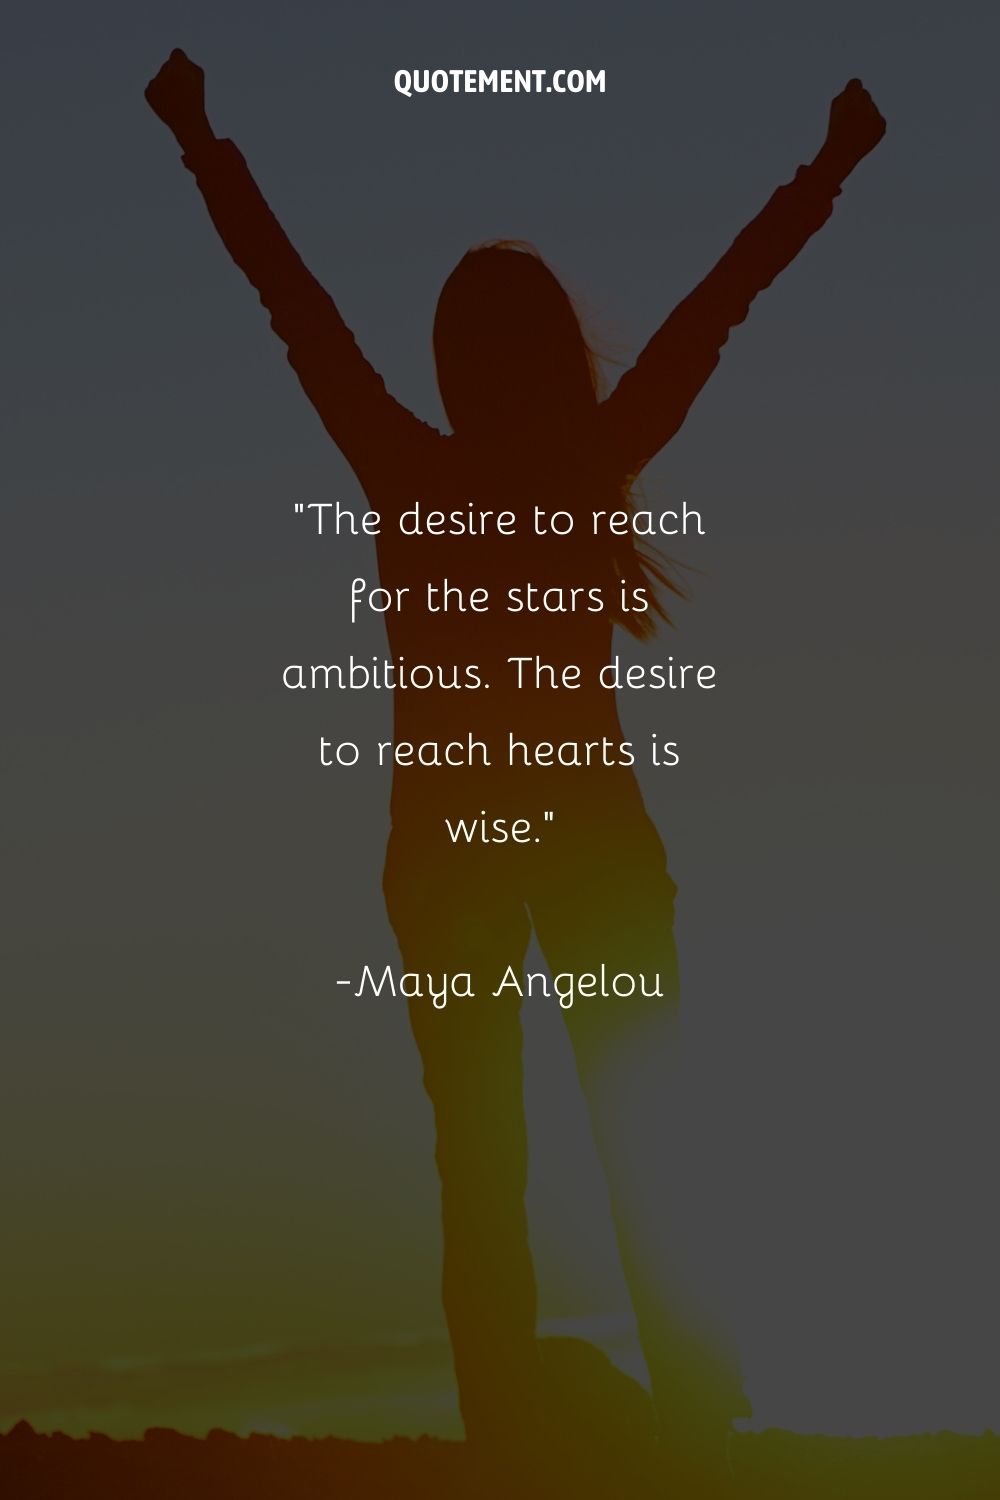 The desire to reach for the stars is ambitious. The desire to reach hearts is wise.